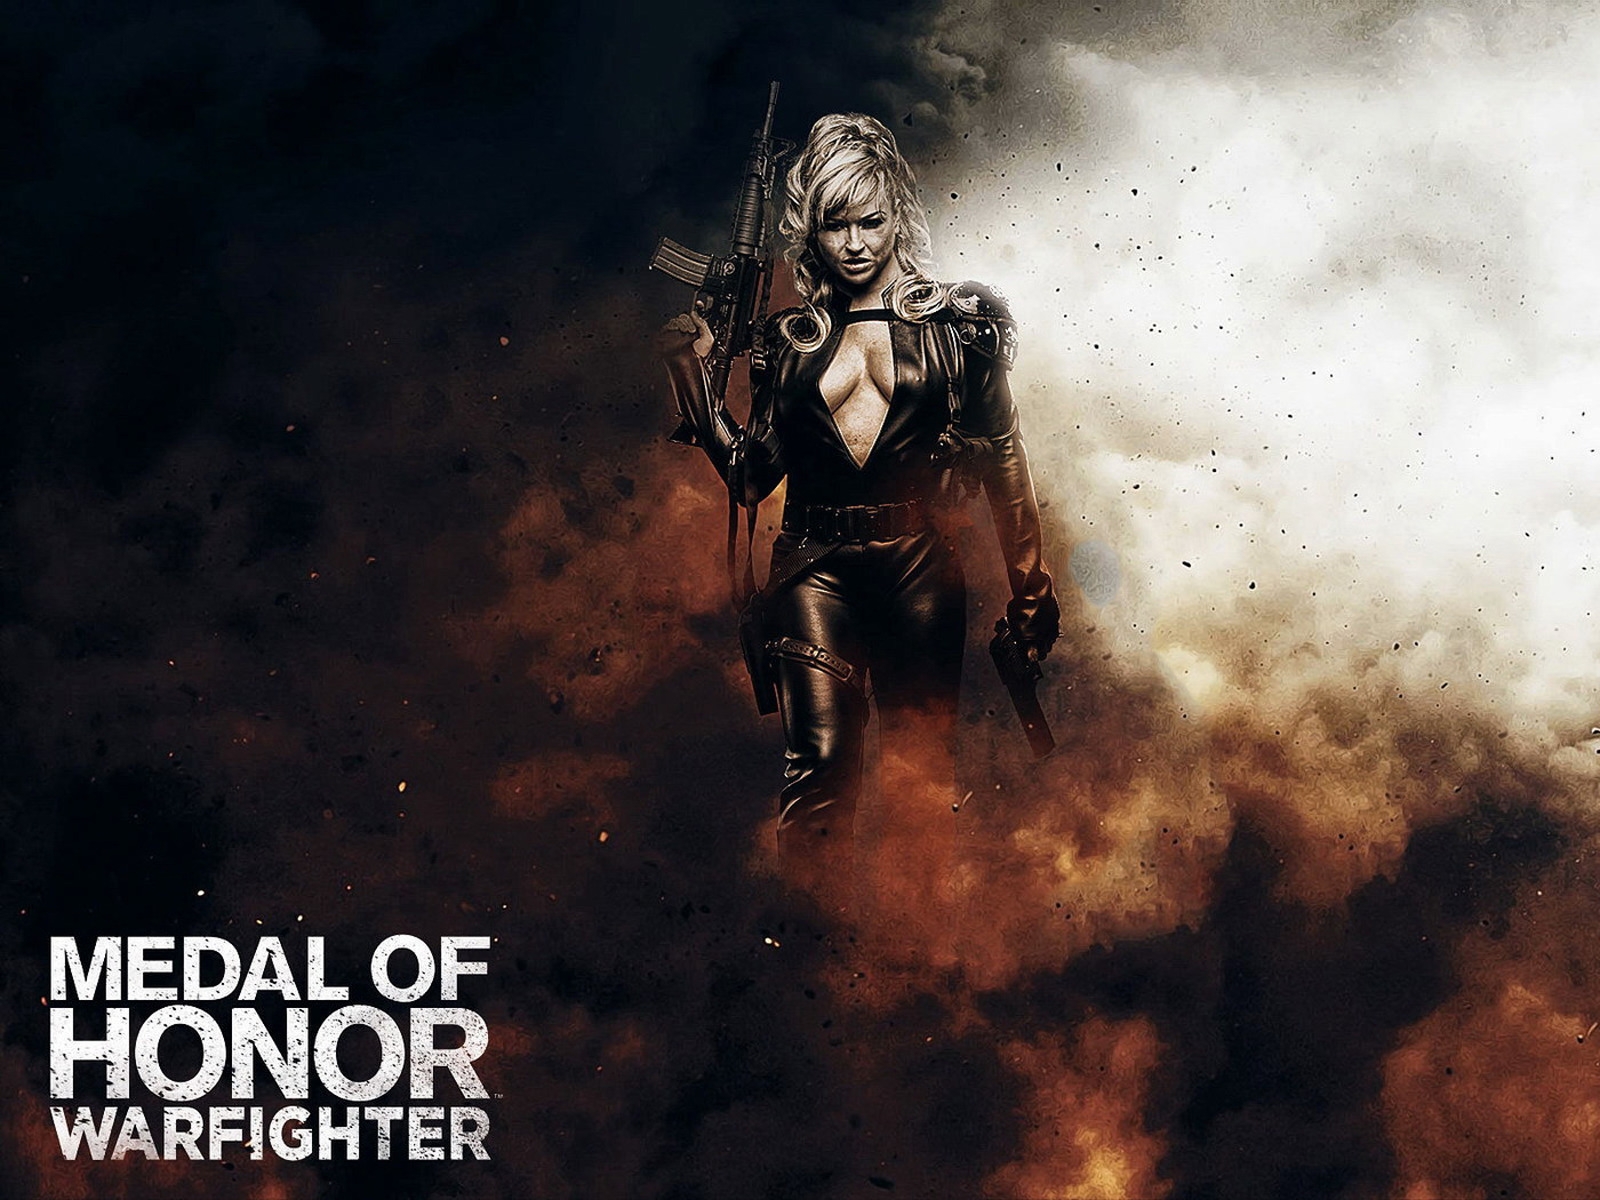 Medal of Honor Warfighter Girl for 1600 x 1200 resolution